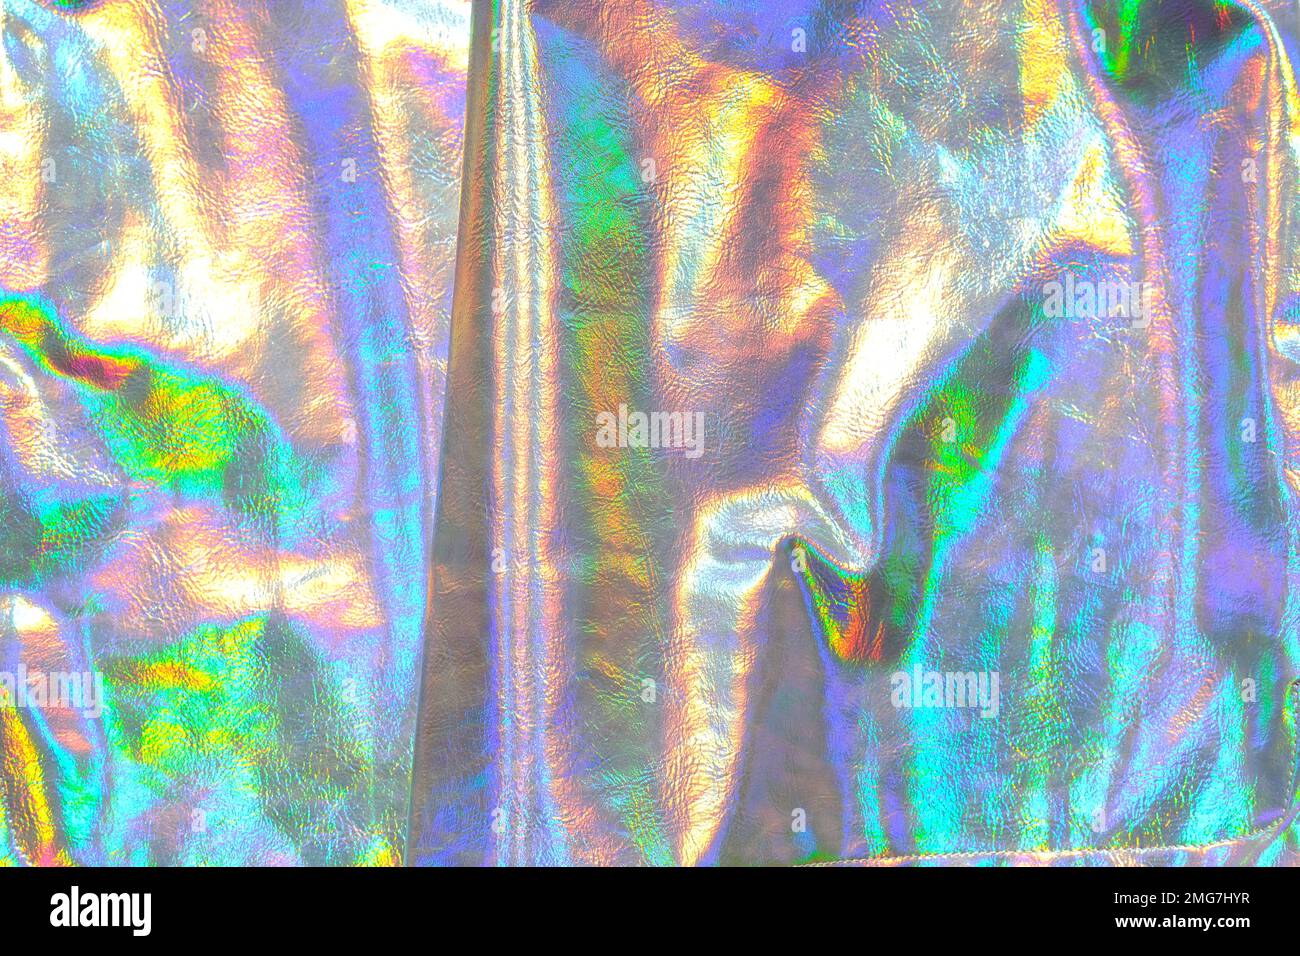 Holographic metallic background.metallic fabric texture with iridescent gradients. wallpaper In silver, purple and green colors.metal holographic Stock Photo